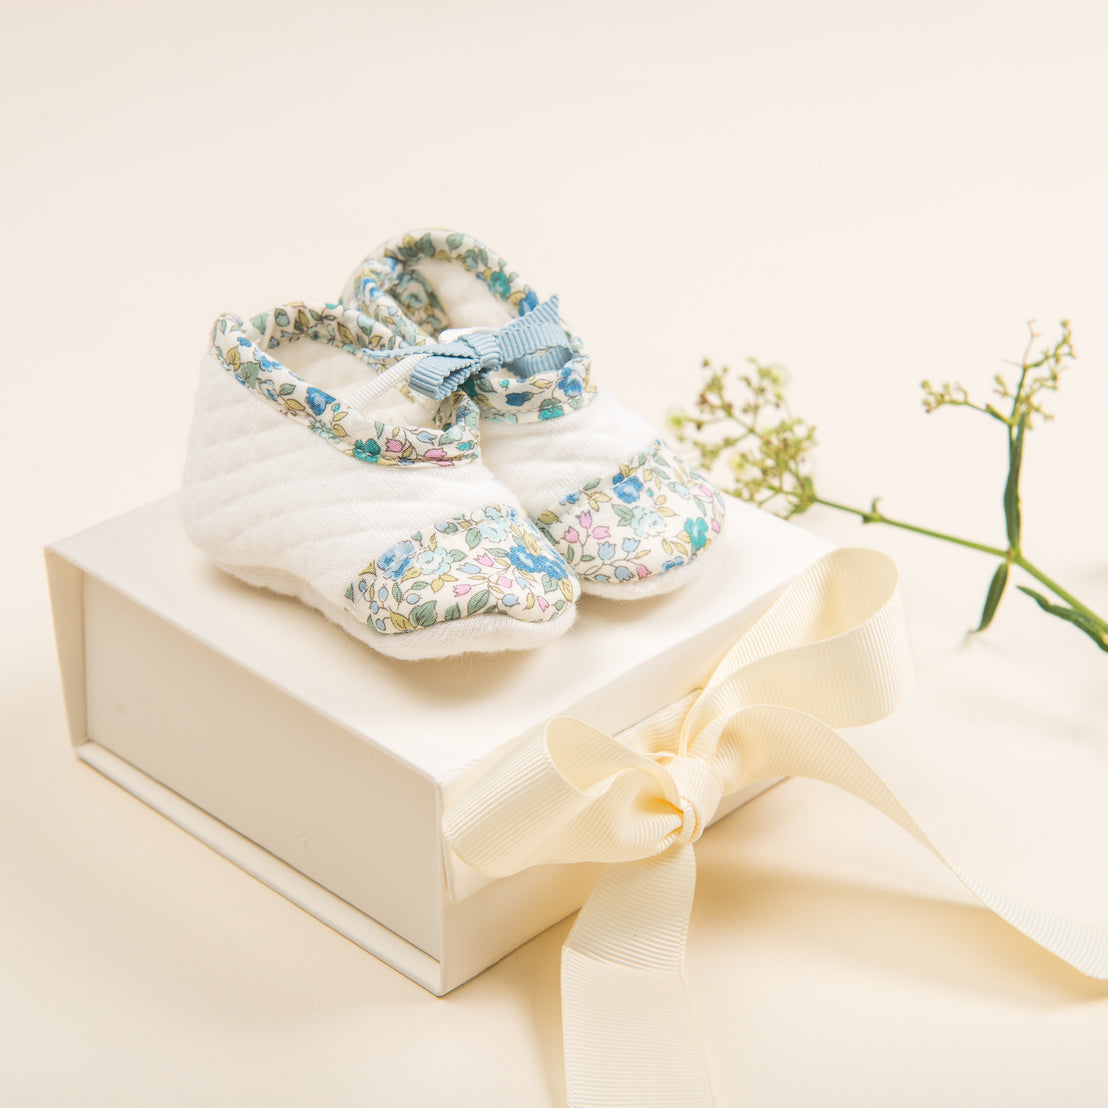 A pair of Petite Fleur Quilted Booties for newborn babies with floral pattern and blue ribbons displayed on a boutique white box adorned with a satin bow, accompanied by small white flowers on a light background.